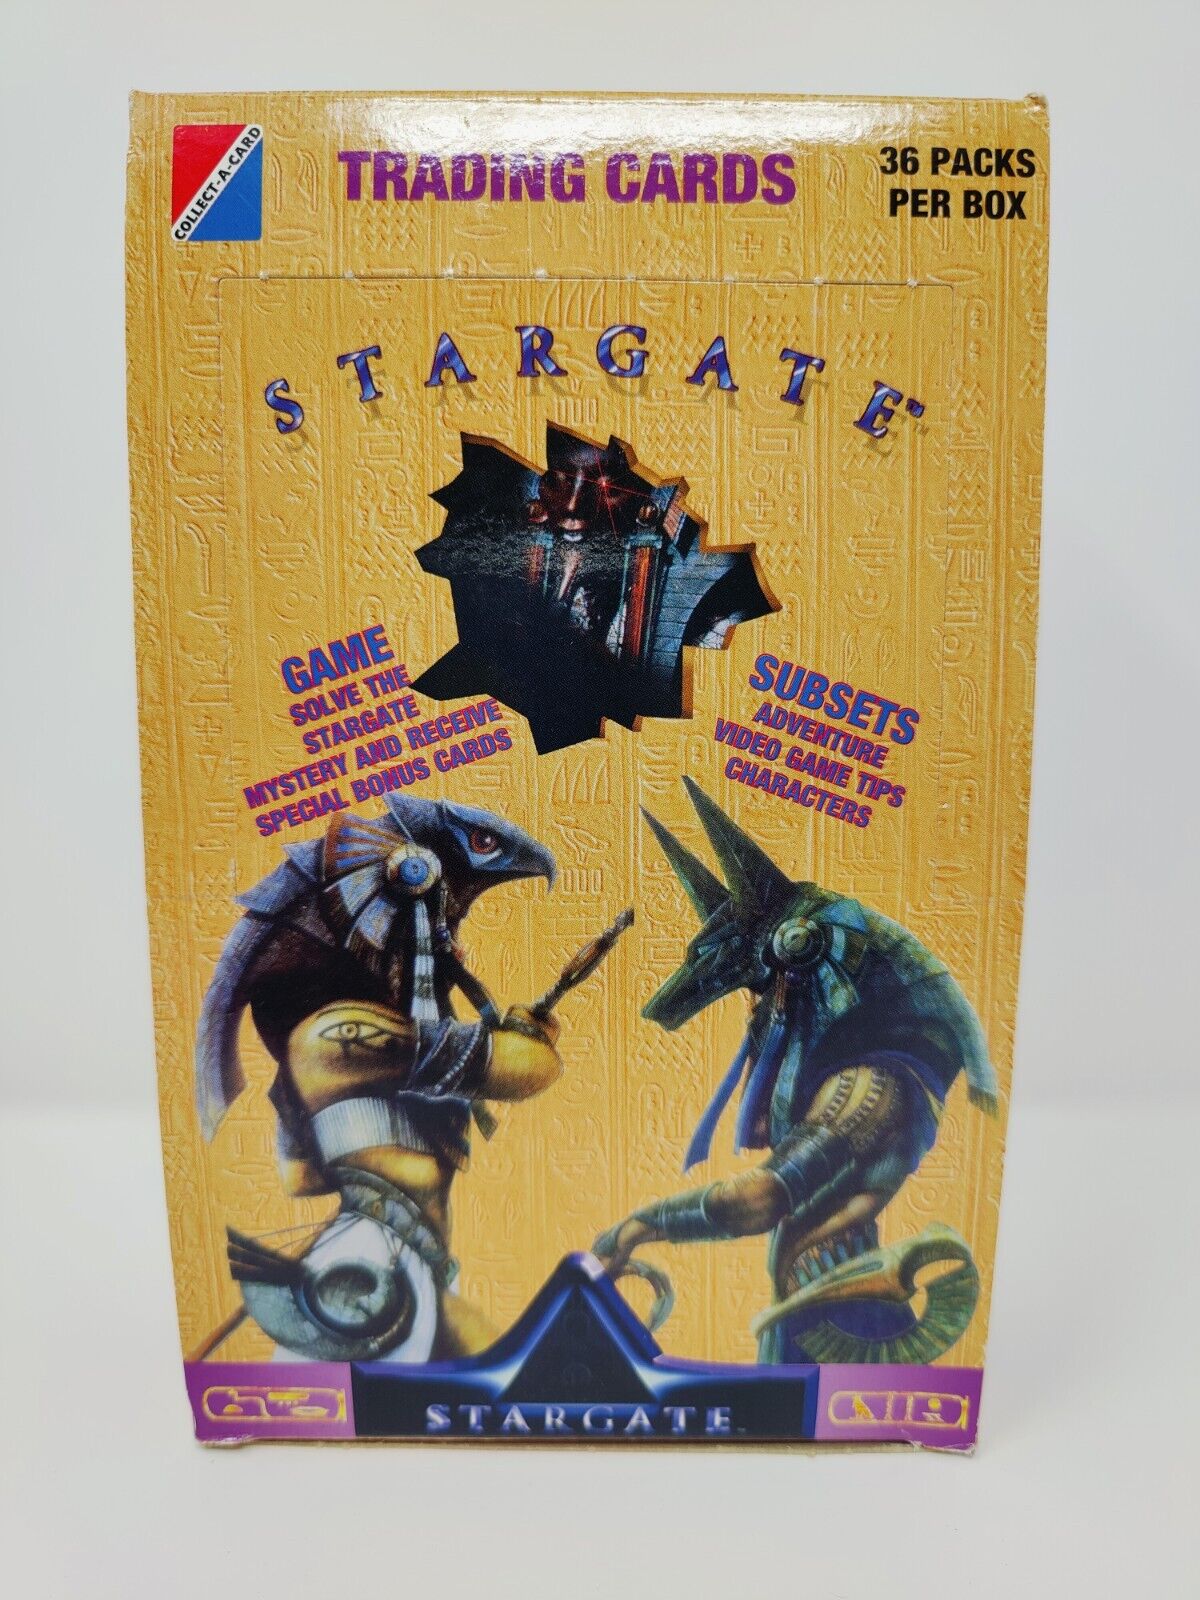 Stargate Trading Cards 36 Packs Box Collect-A-Card 1994 - Open Box